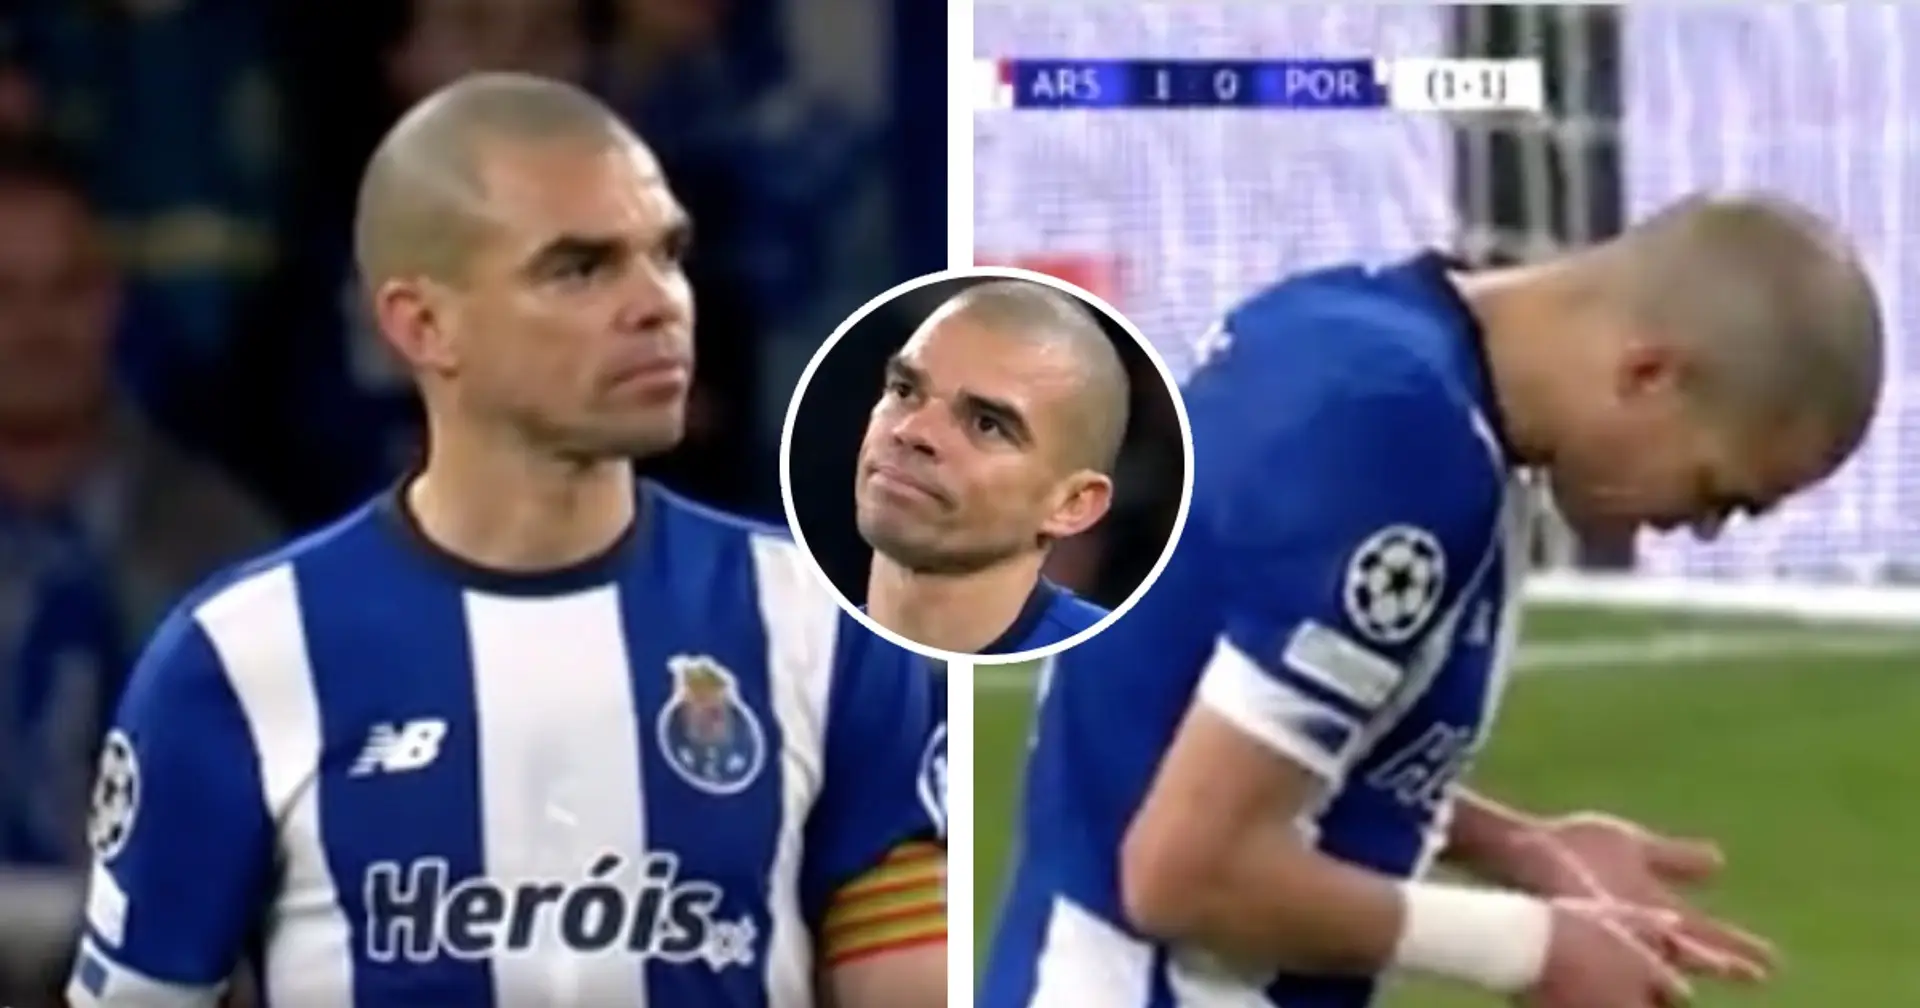 SPOTTED: Pepe's reaction to Trossard's goal - he almost cried